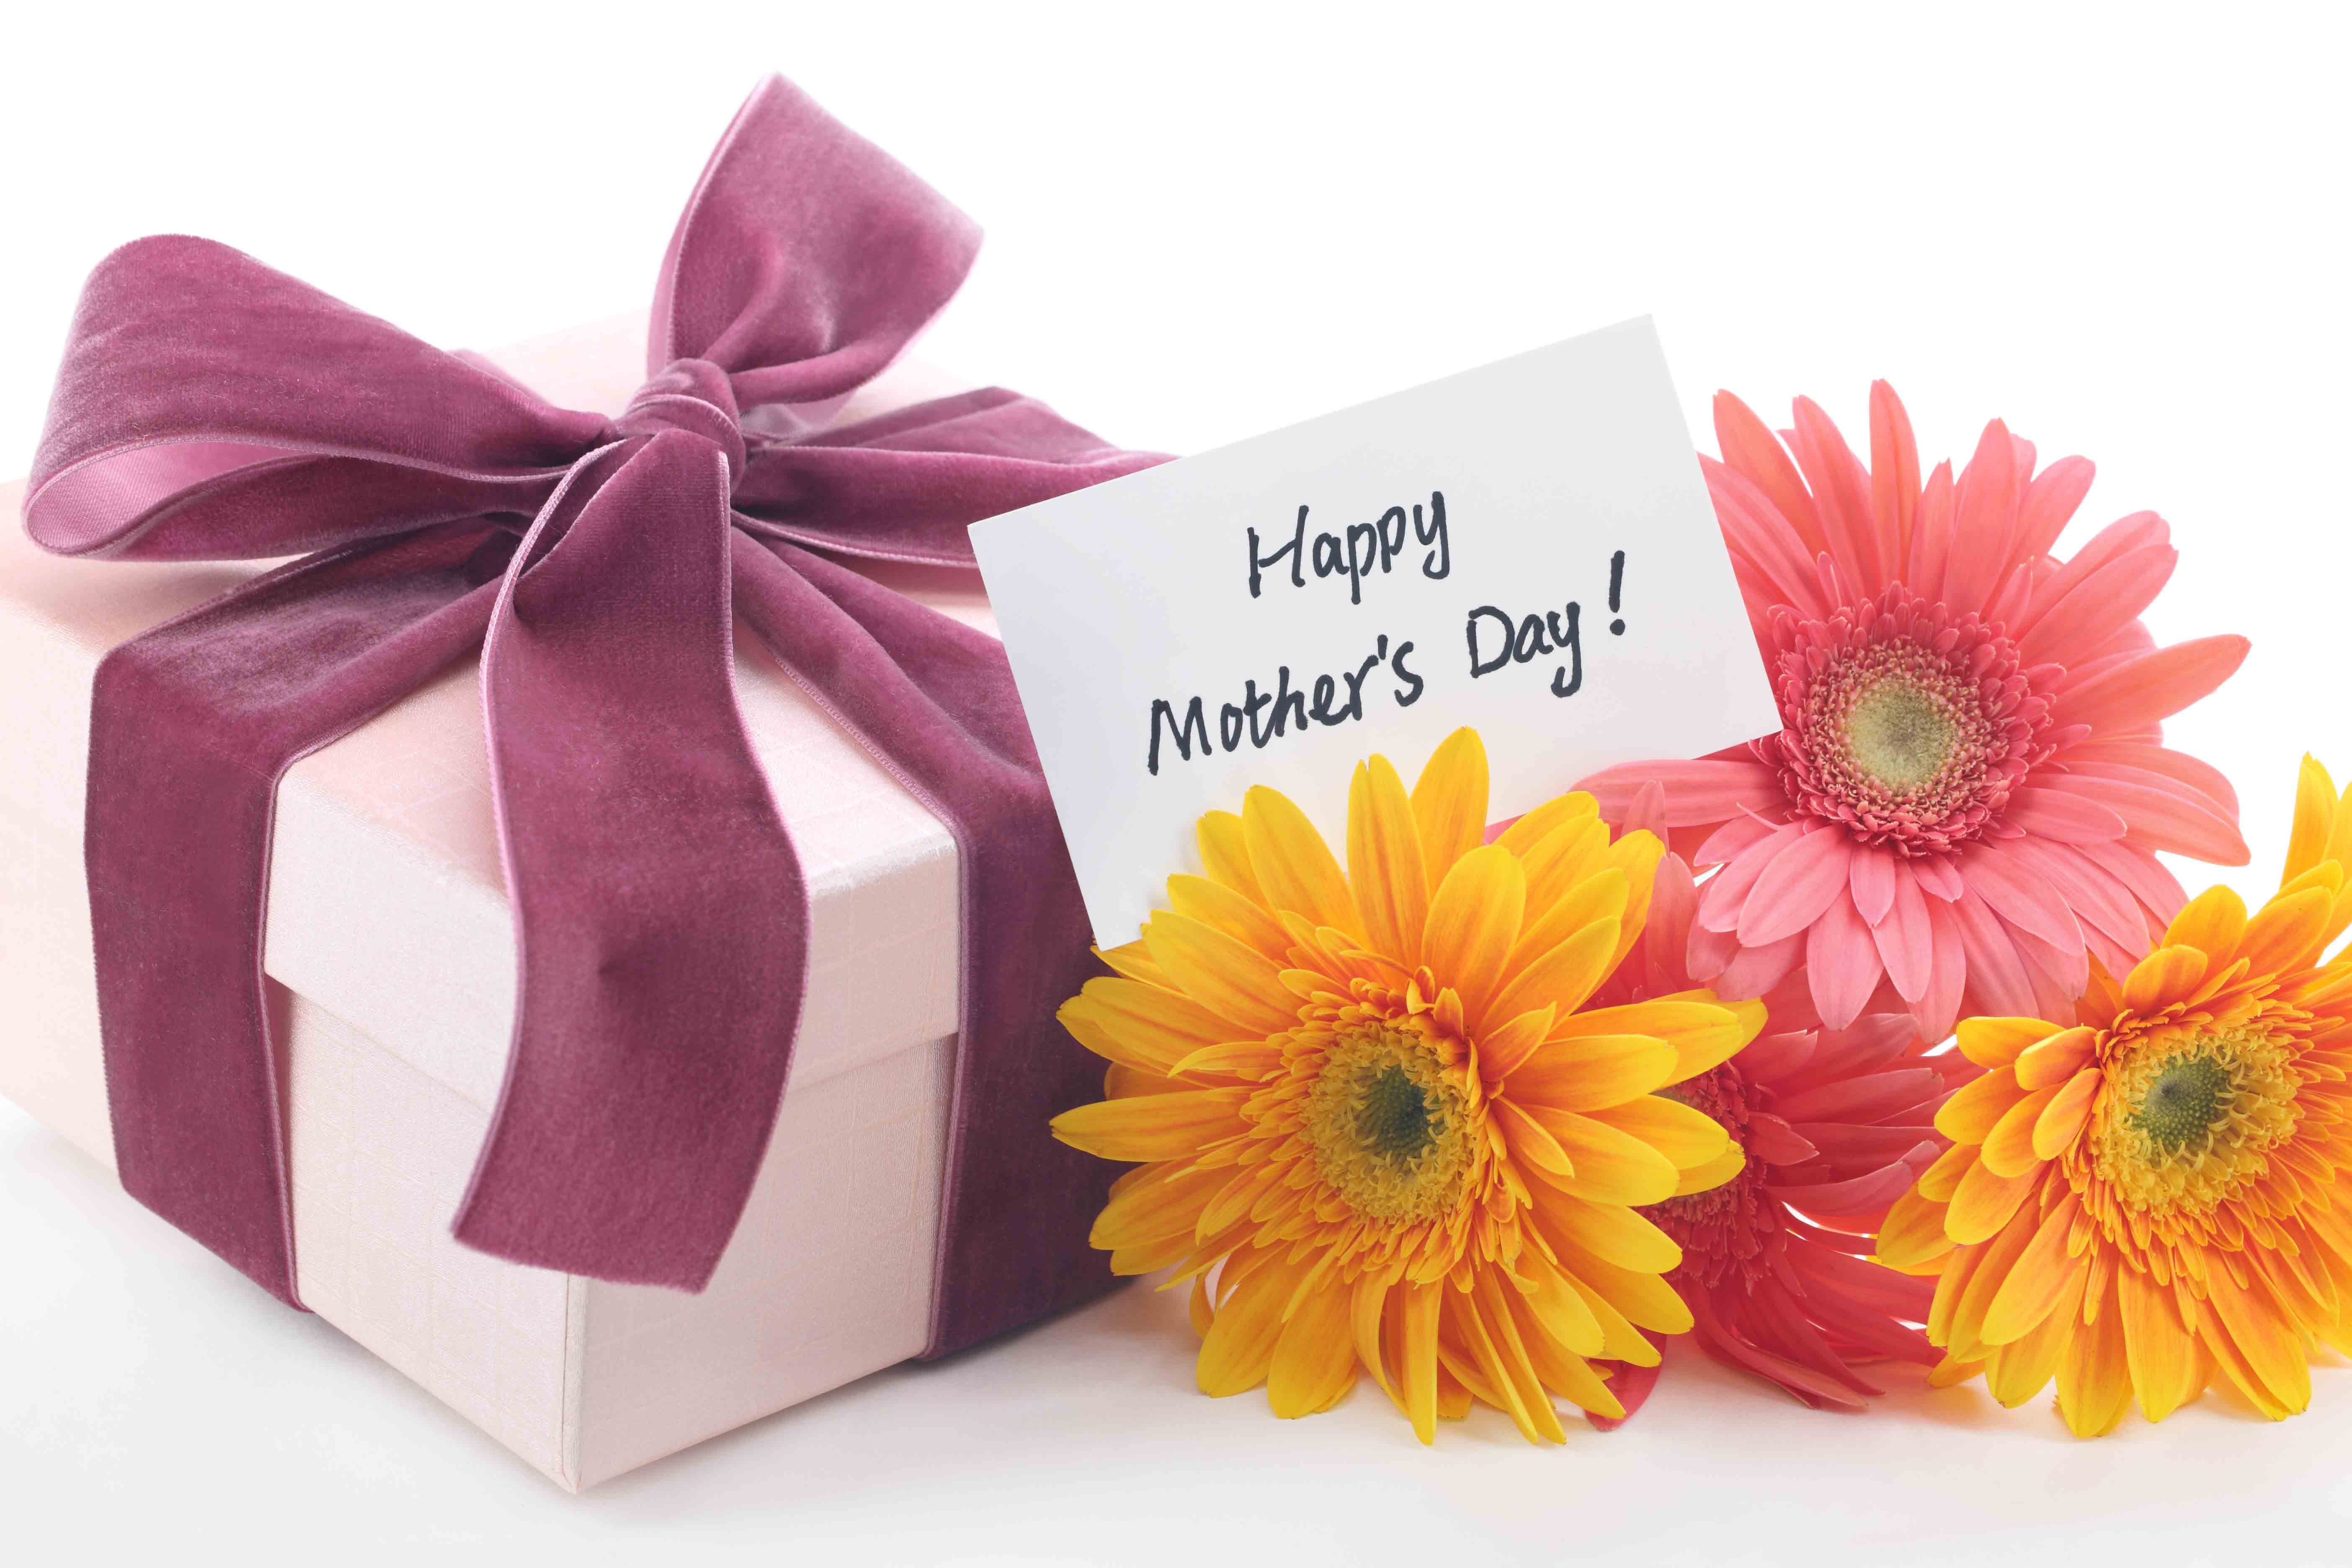 31 Very Best Mother’s Day Greeting Pictures And Photos